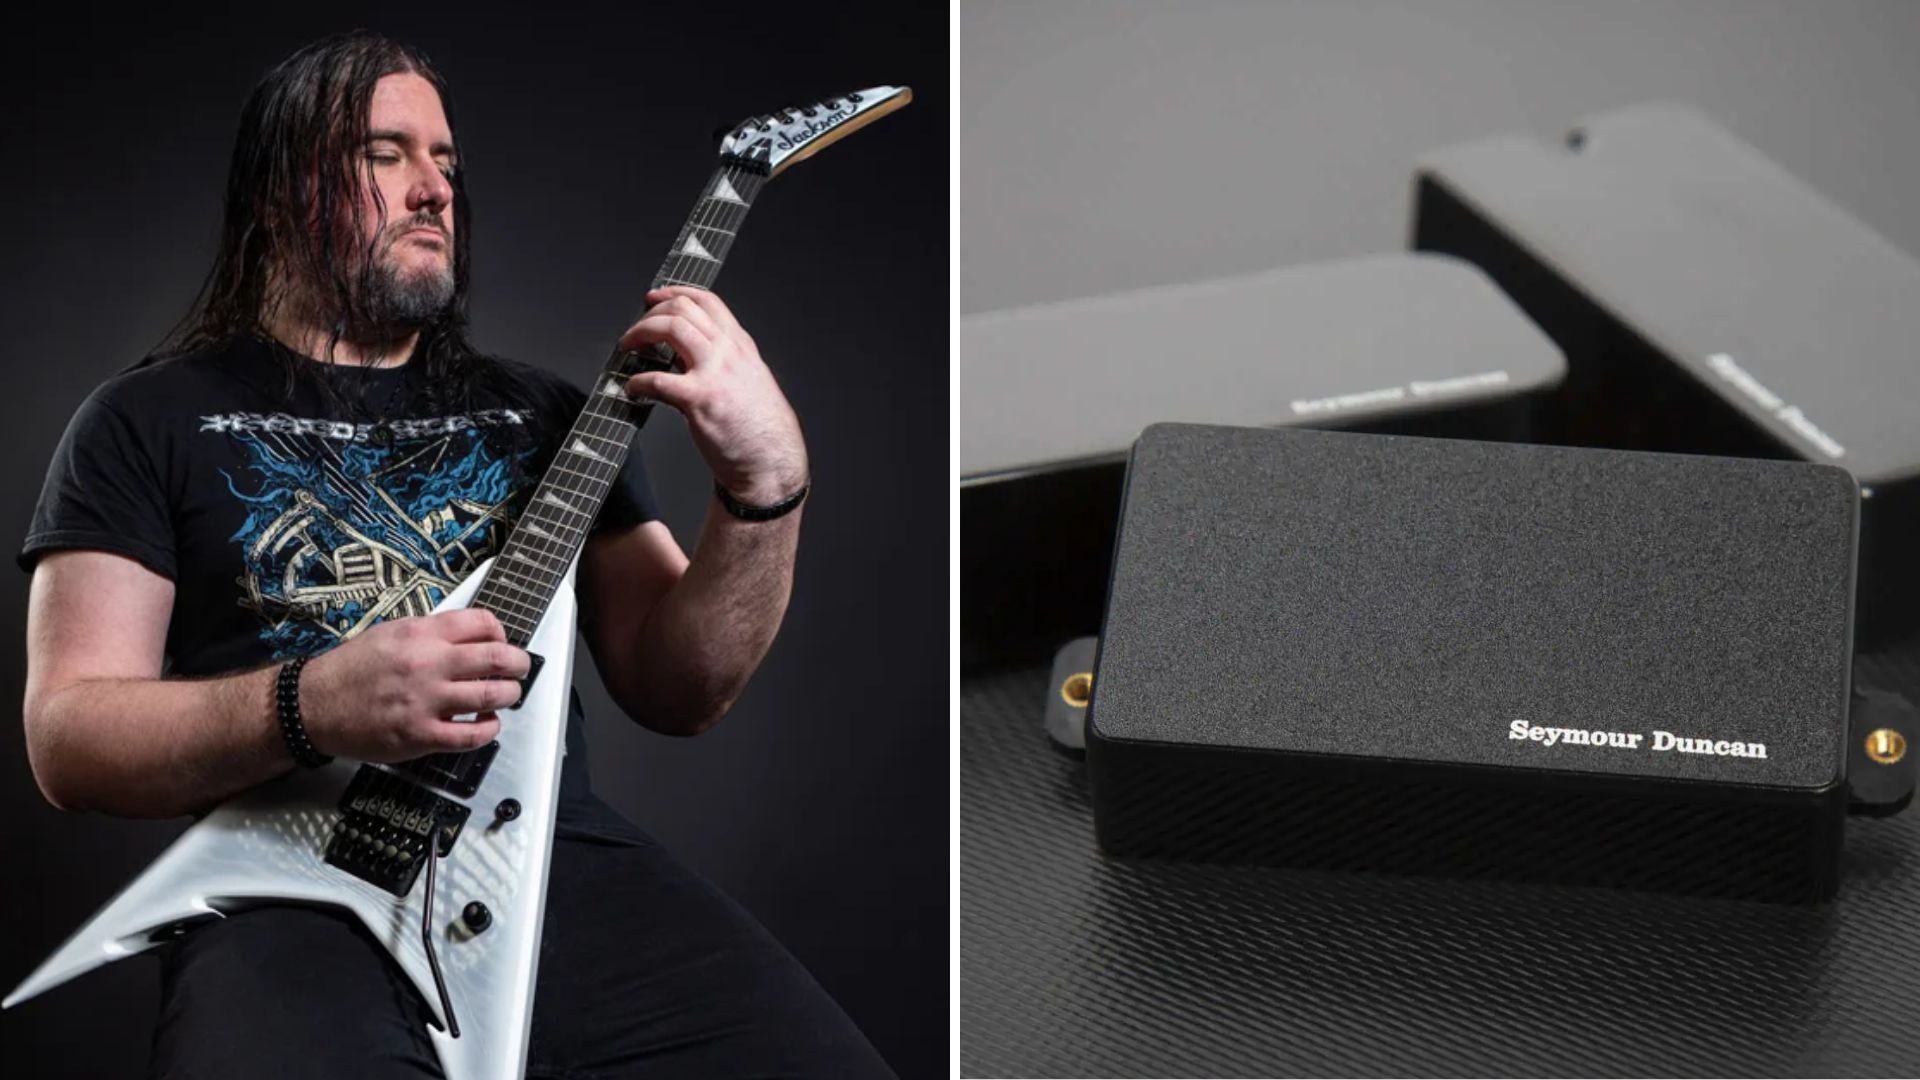 “They’re the all-in-one stop for what I’m looking for”: Seymour Duncan debuts signature Blackouts for Trivium’s Corey Beaulieu, treating its active metal humbucker to a distinct sonic twist